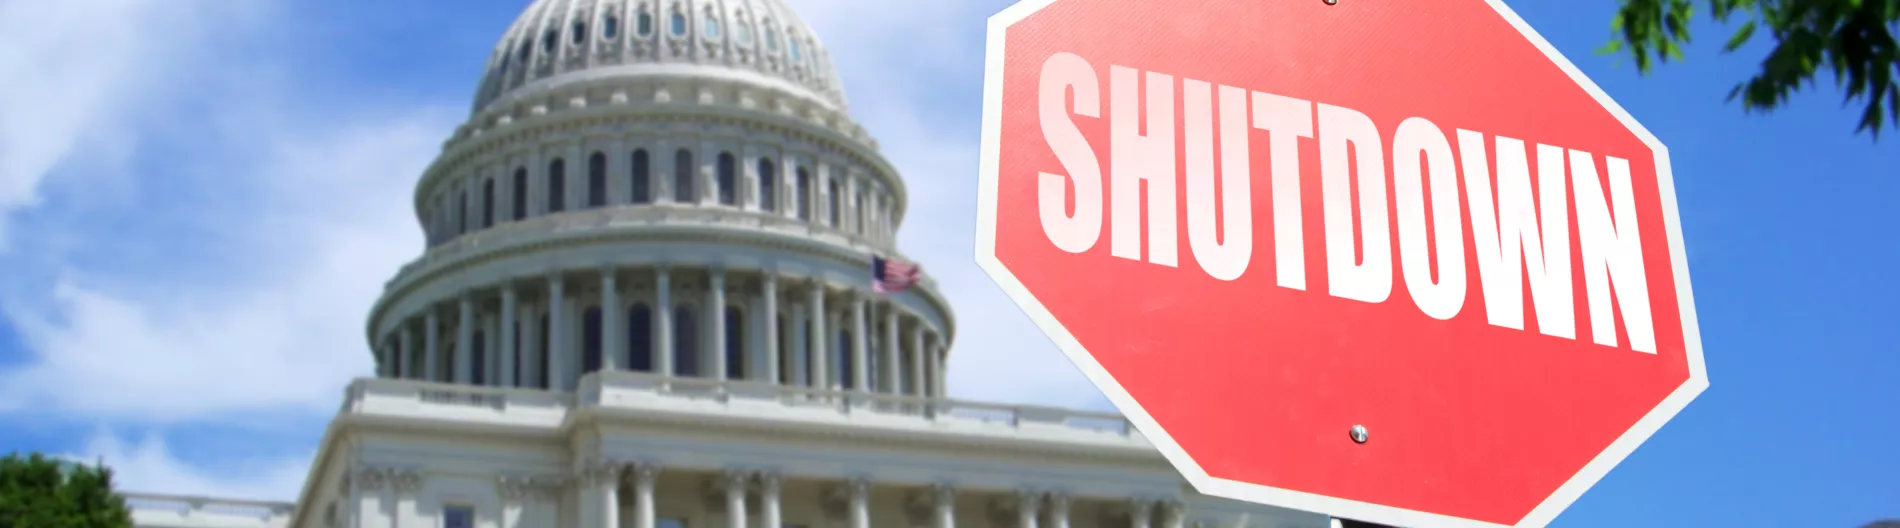 Stop sign in front of U.S. Capitol Building